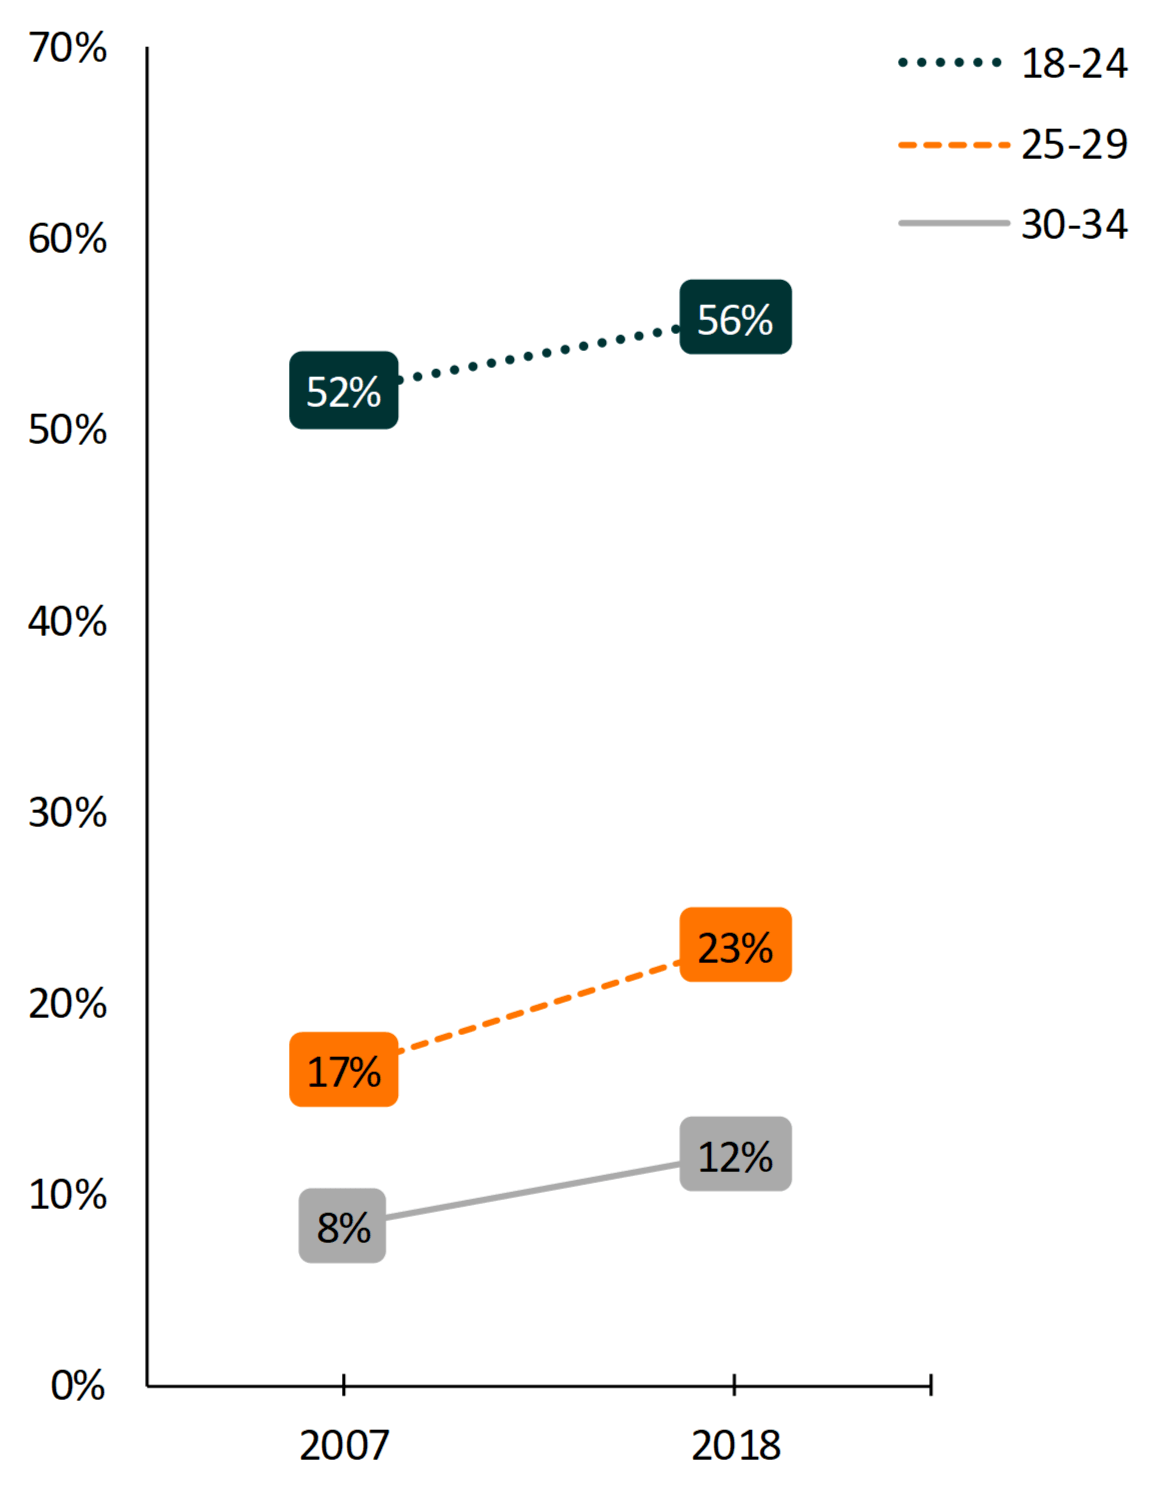 gray, orange, and teal line graph showing share of young adults living in parental hme by age group '07-'18